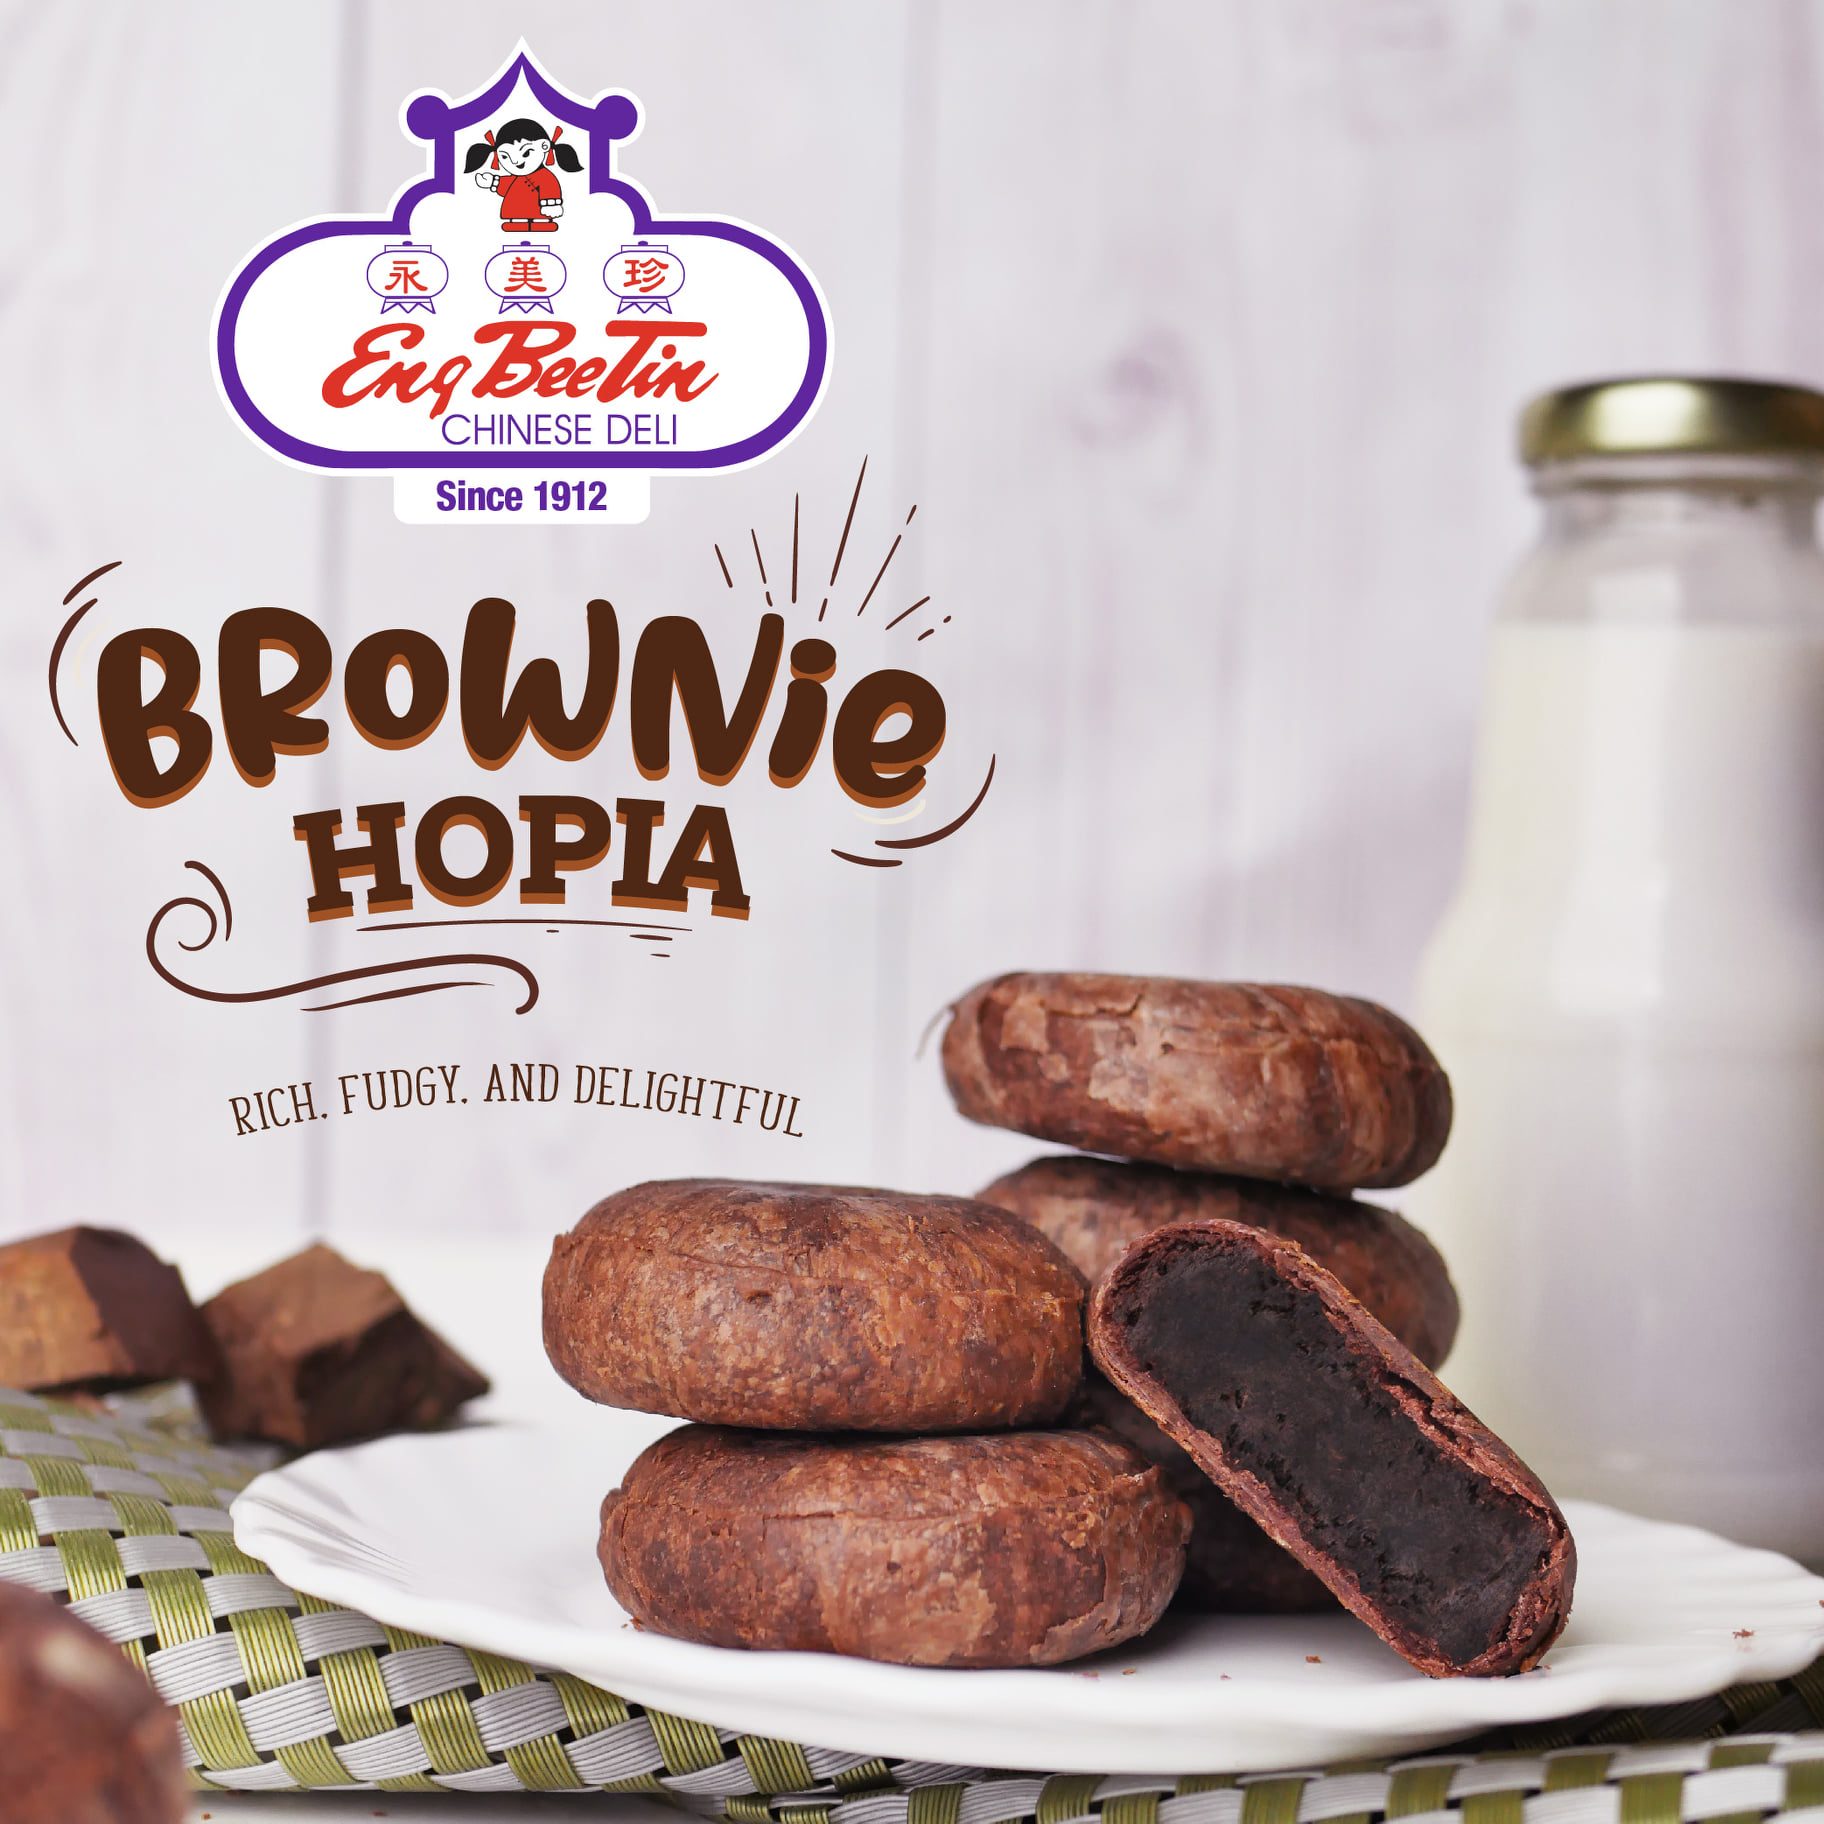 Eng Bee Tin launches new brownie hopia